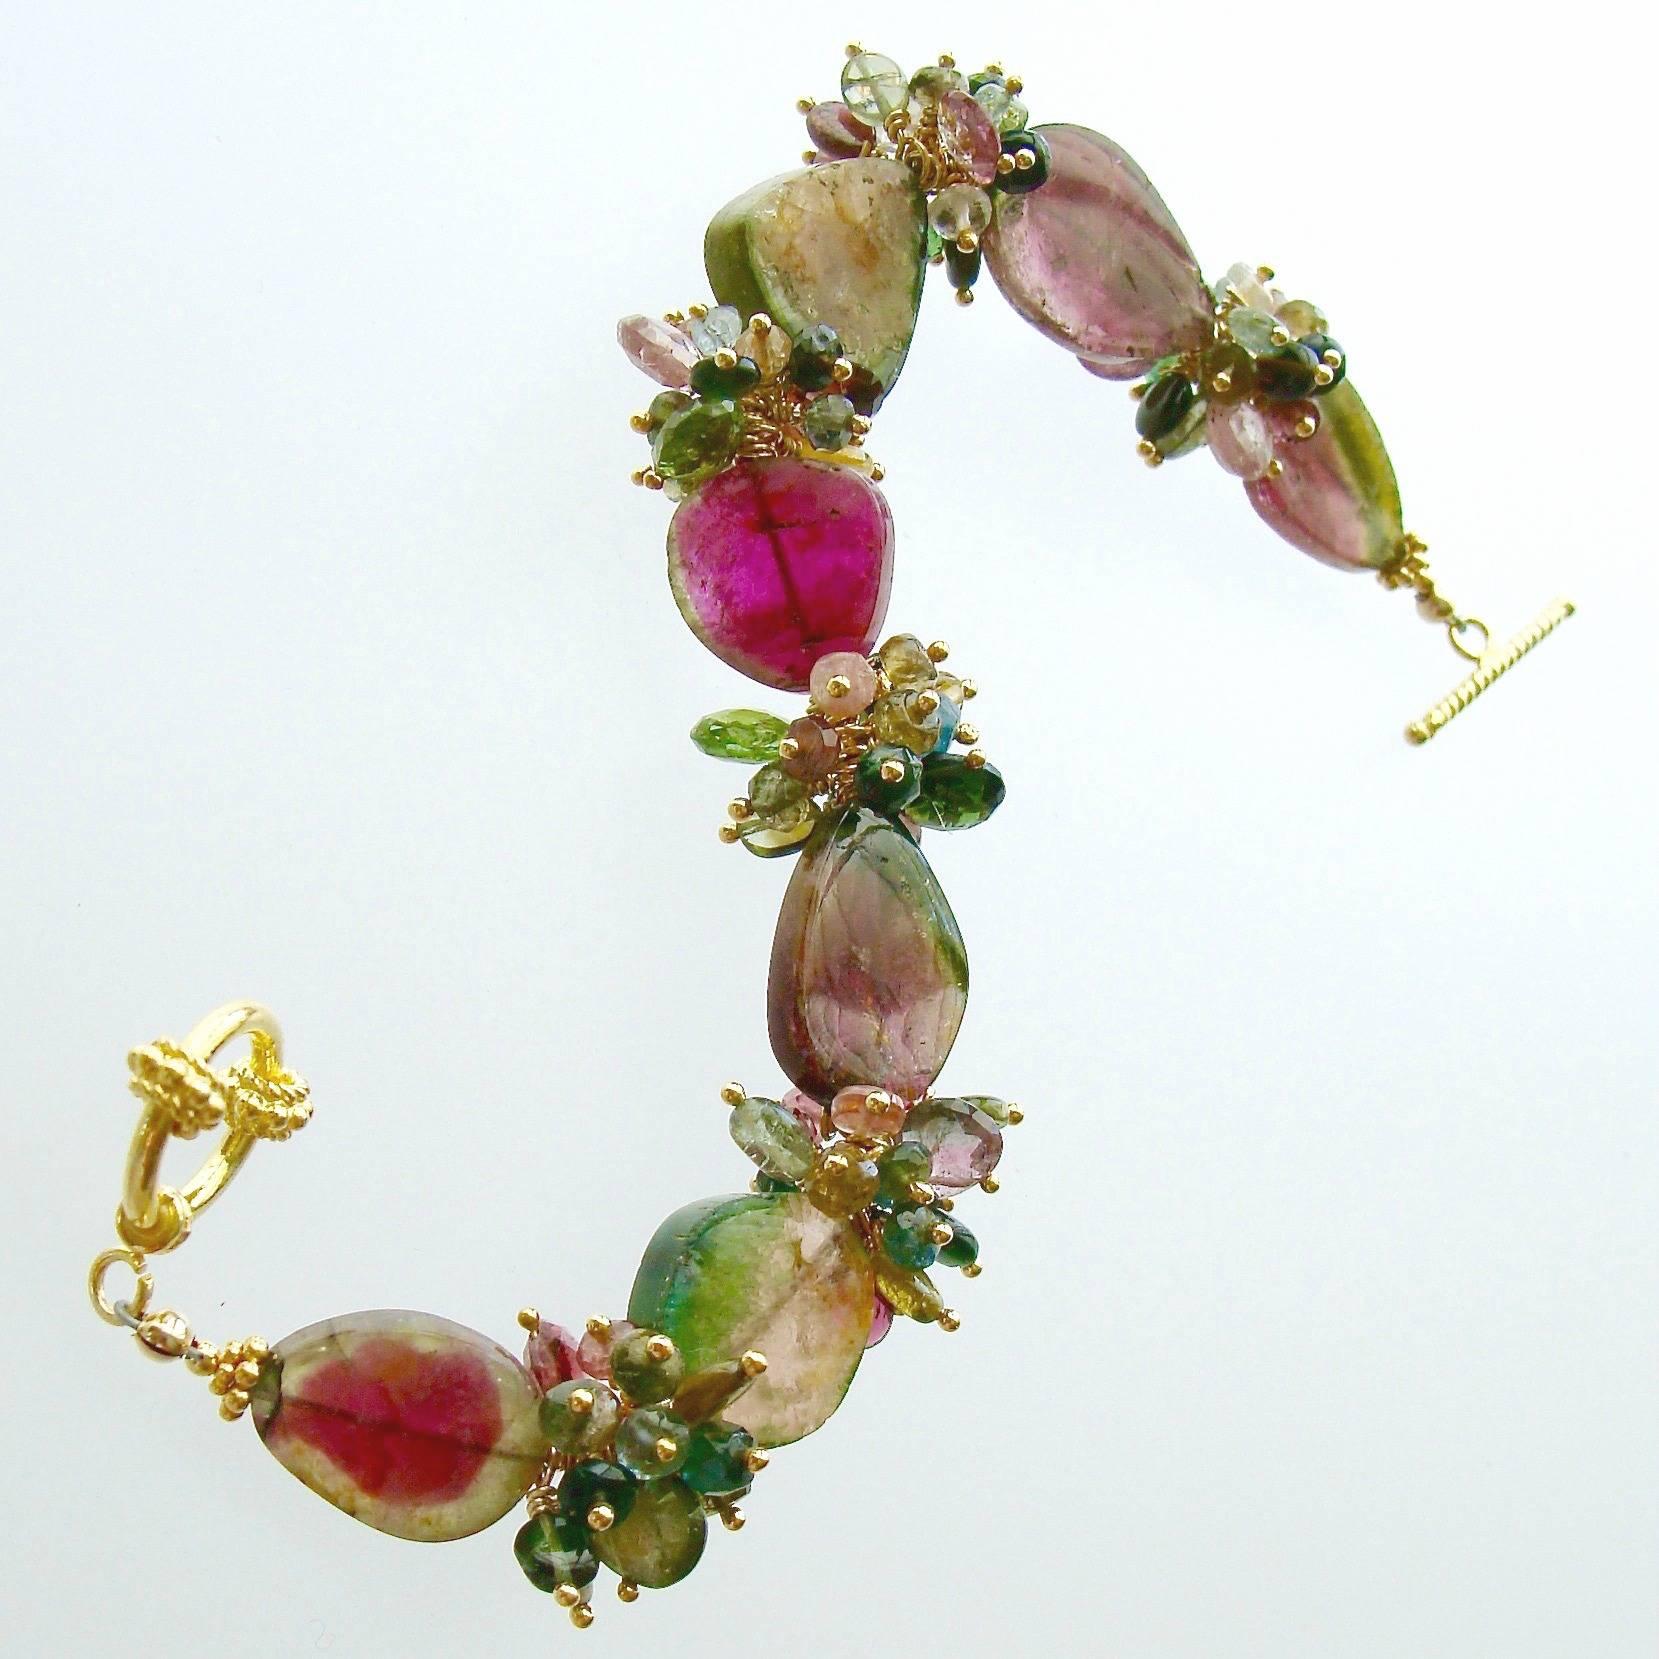 Clarissa III Bracelet.

If you love tourmaline – this luxe bracelet will surely make your hear skip a beat!  Gorgeous pink and green slices of multicolored watermelon tourmaline slices are interspersed with delicate cluster frills in a cacophony